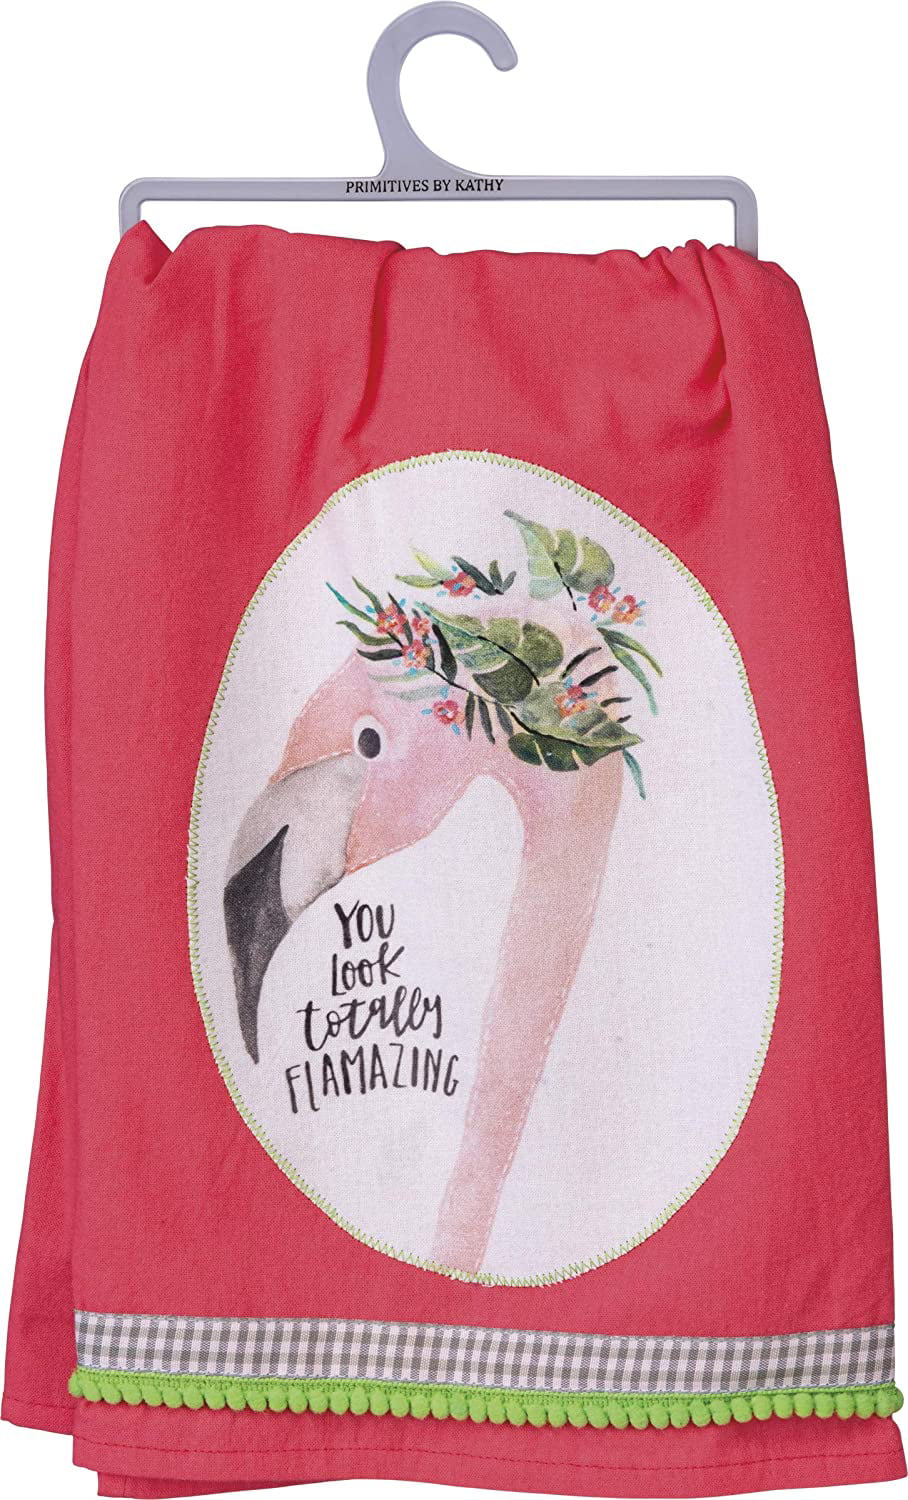 Primitives by Kathy Kitchen Dish Towel Flamingo Find Your Balance 